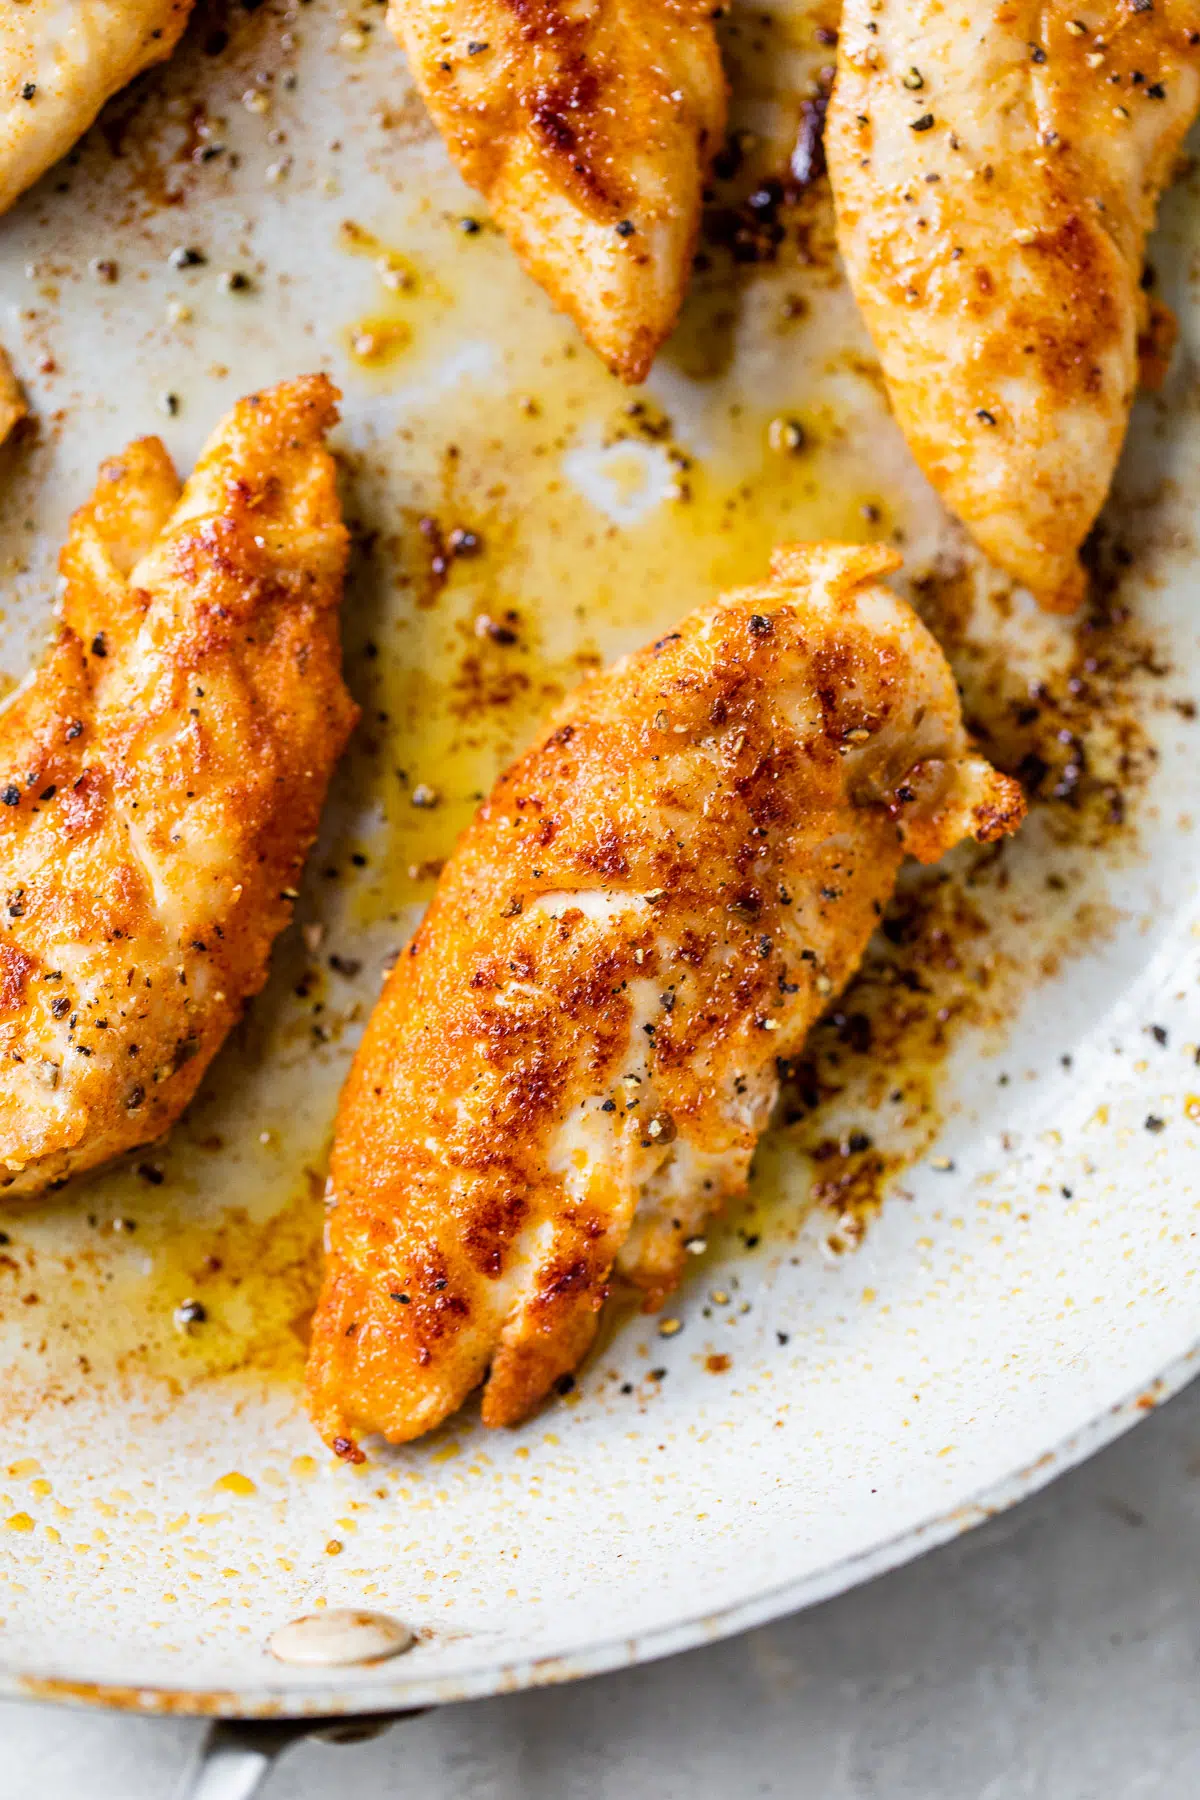 Chicken breasts cooked in a pan, bursting with sensational flavors, against a pristine white background.